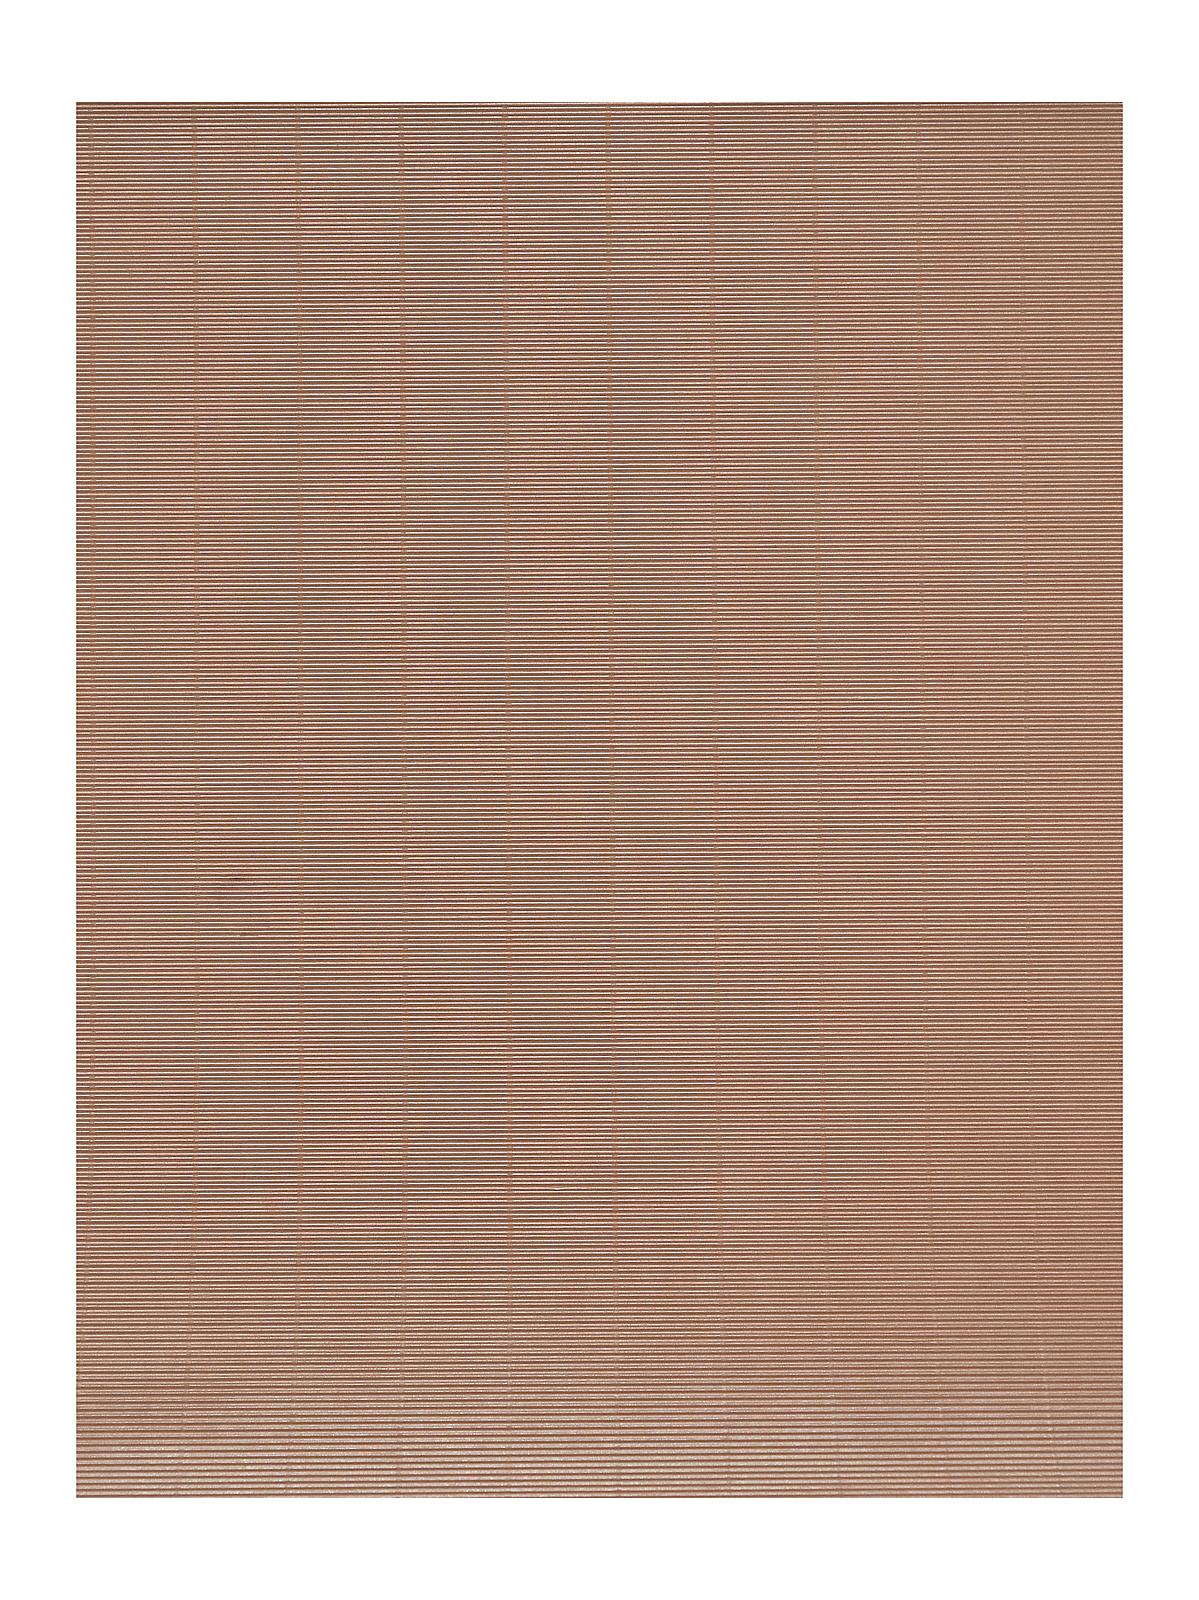 Color Corrugated Paper Brown 19 1 2 In. X 27 1 2 In.